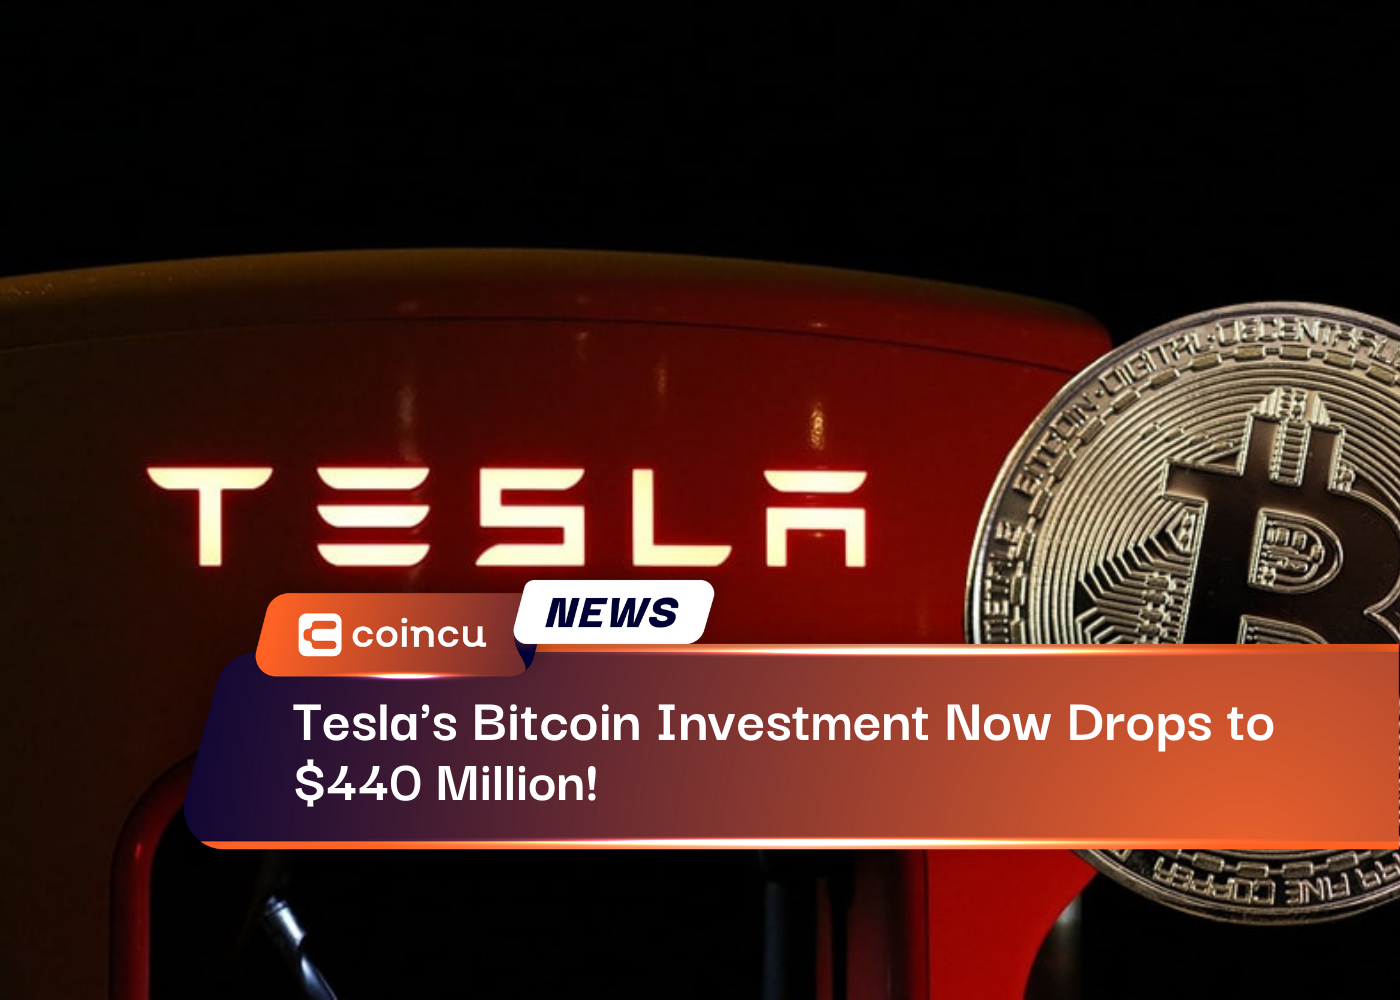 Tesla's Bitcoin Investment Now Drops To $440 Million!